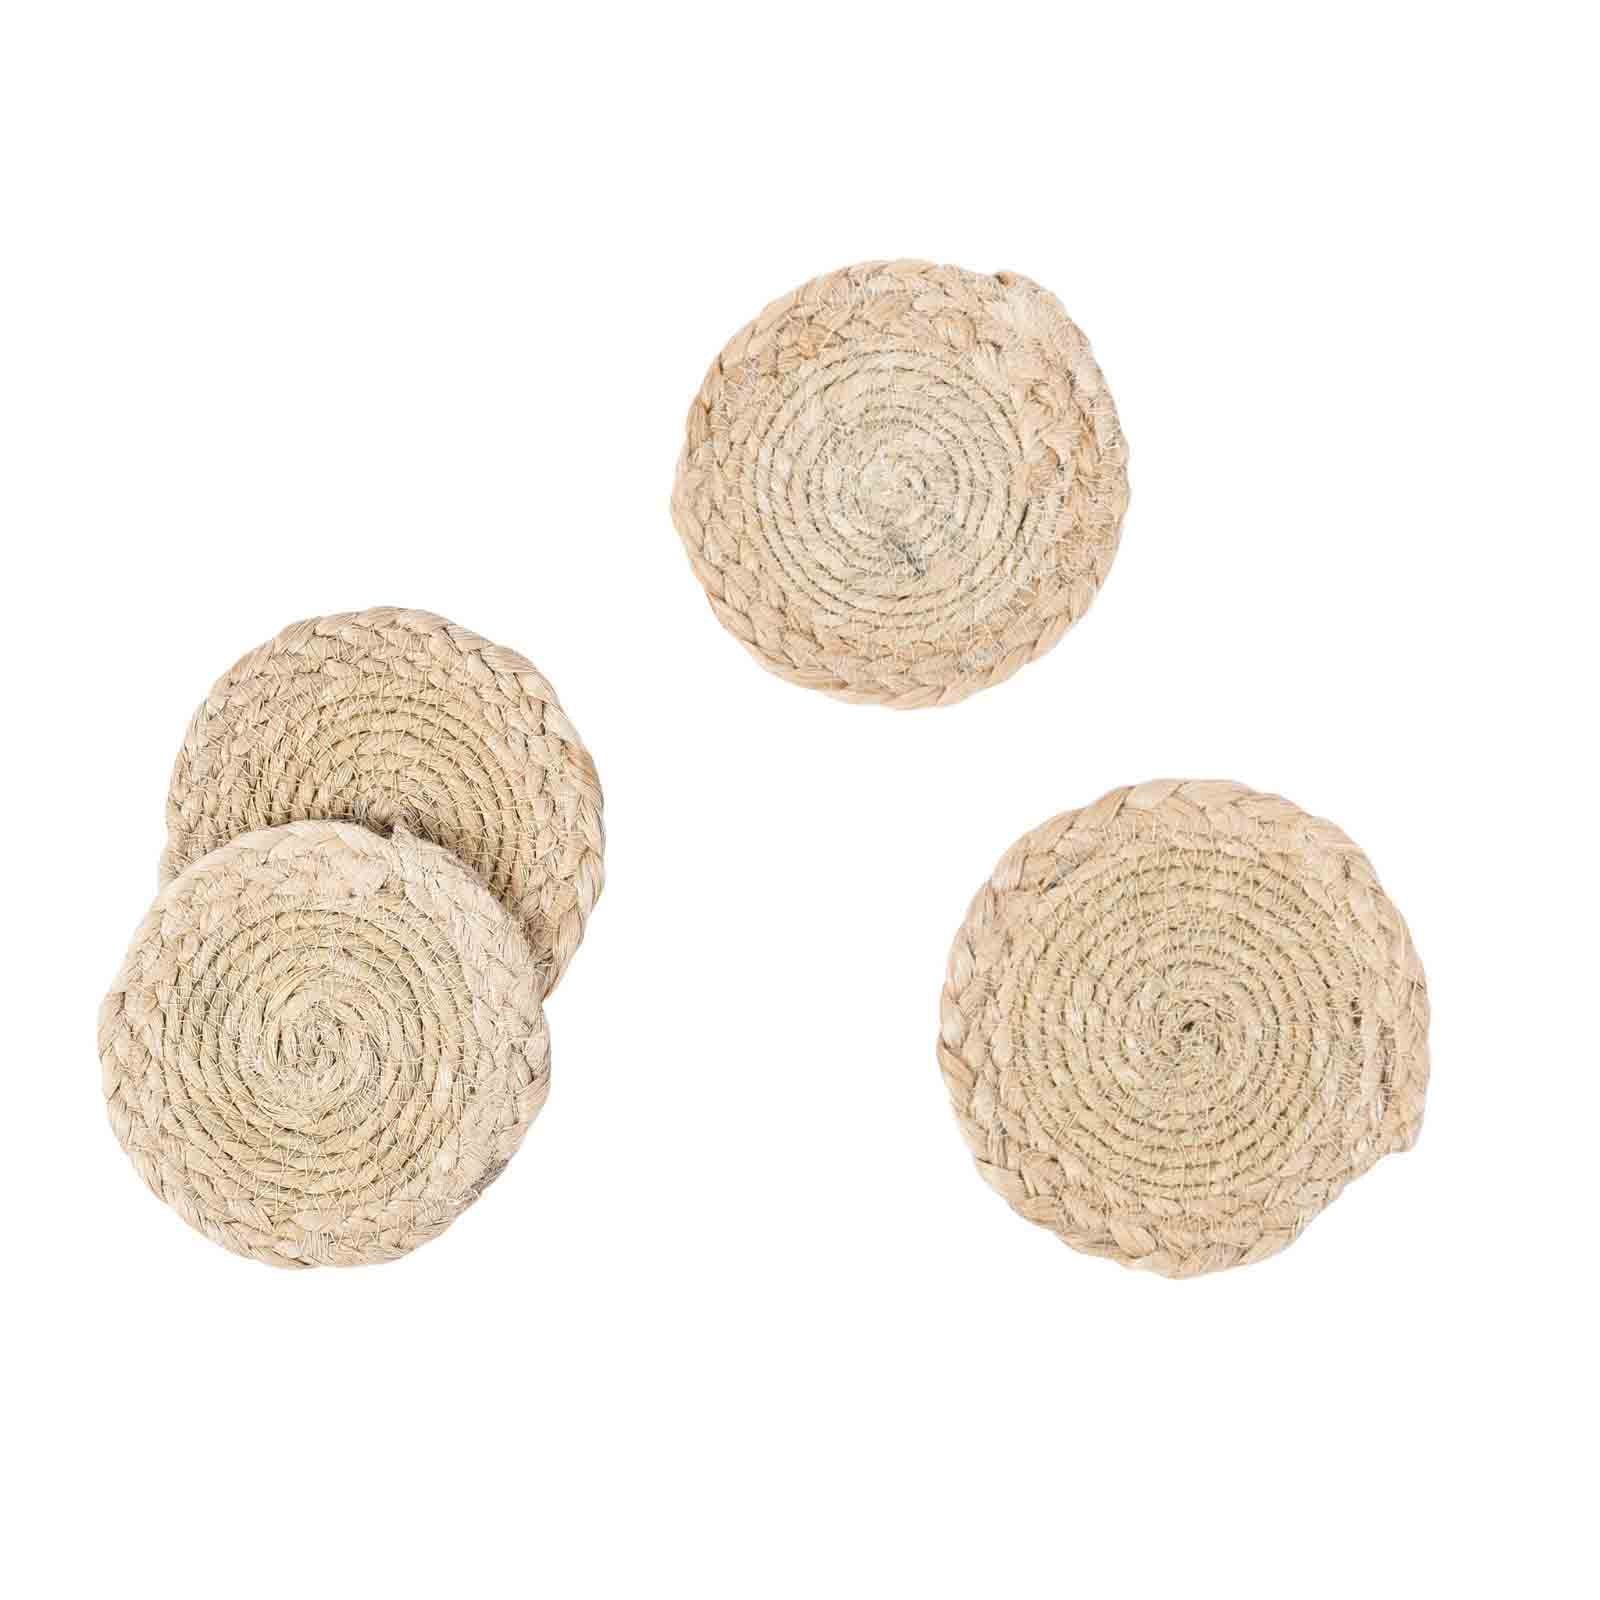 Braided Jute Coaster in Natural, Set of 4